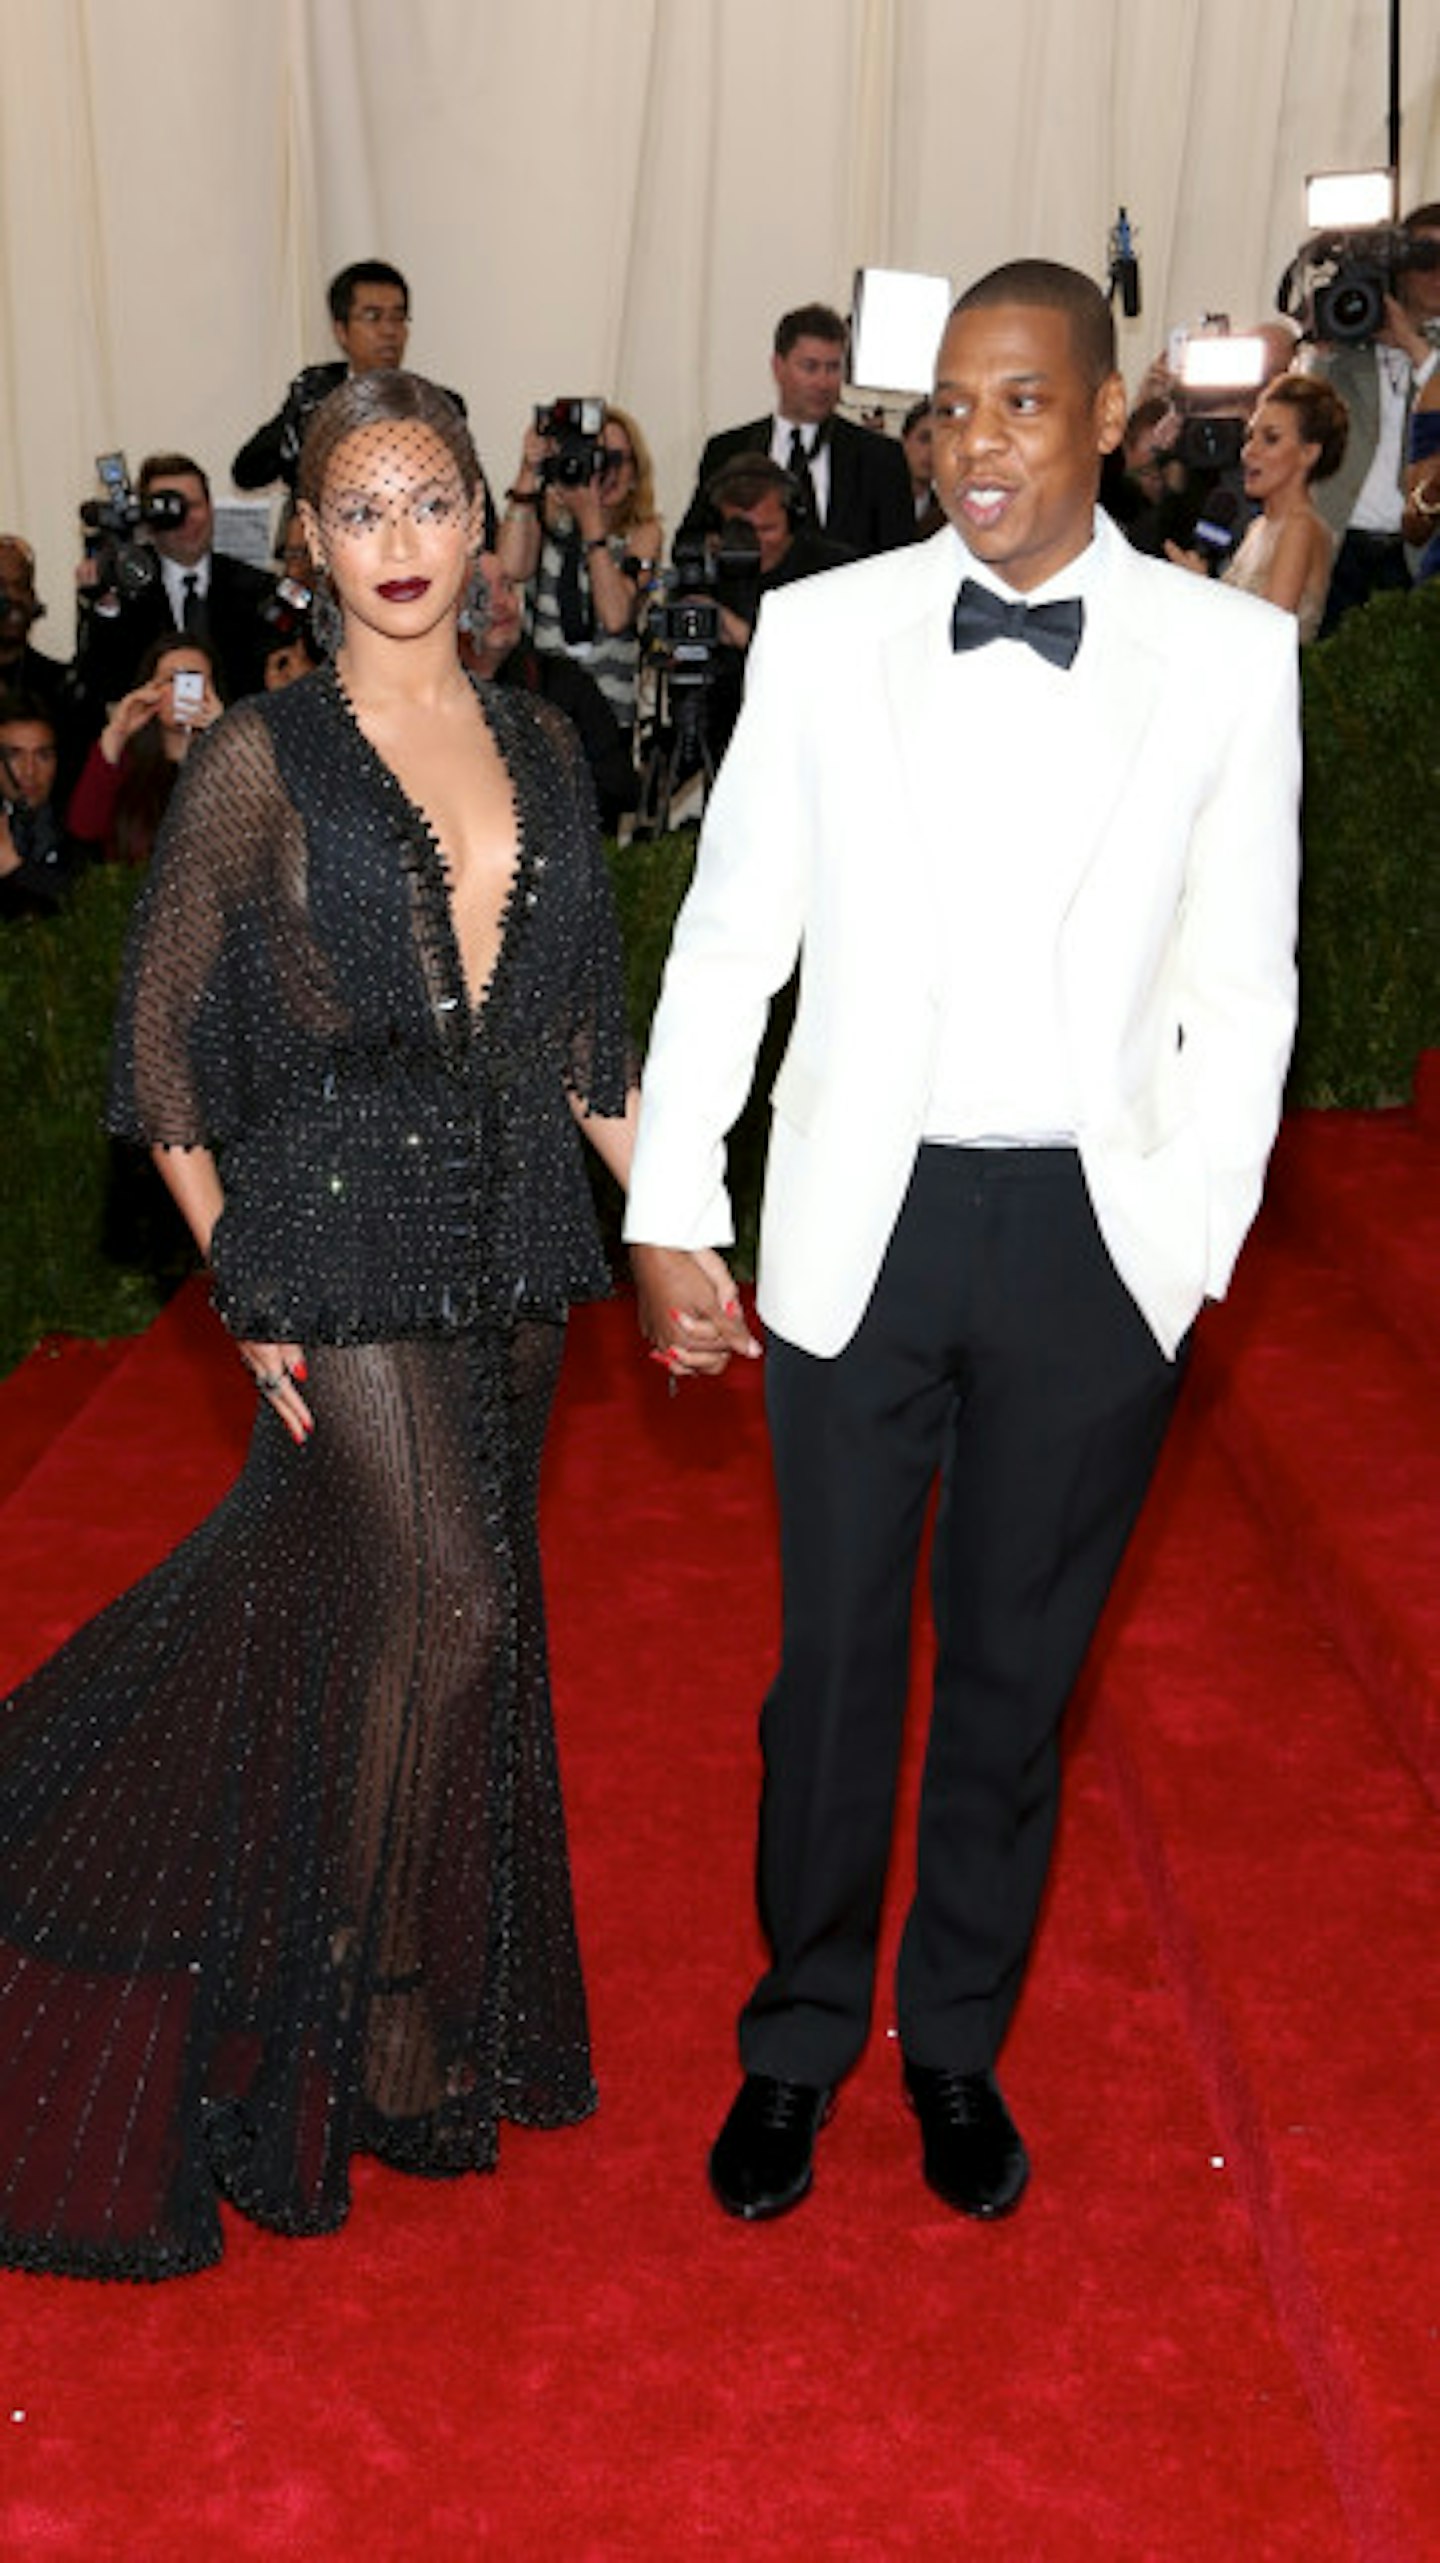 Jay-Z and Beyonce at the Met Gala Ball 2014